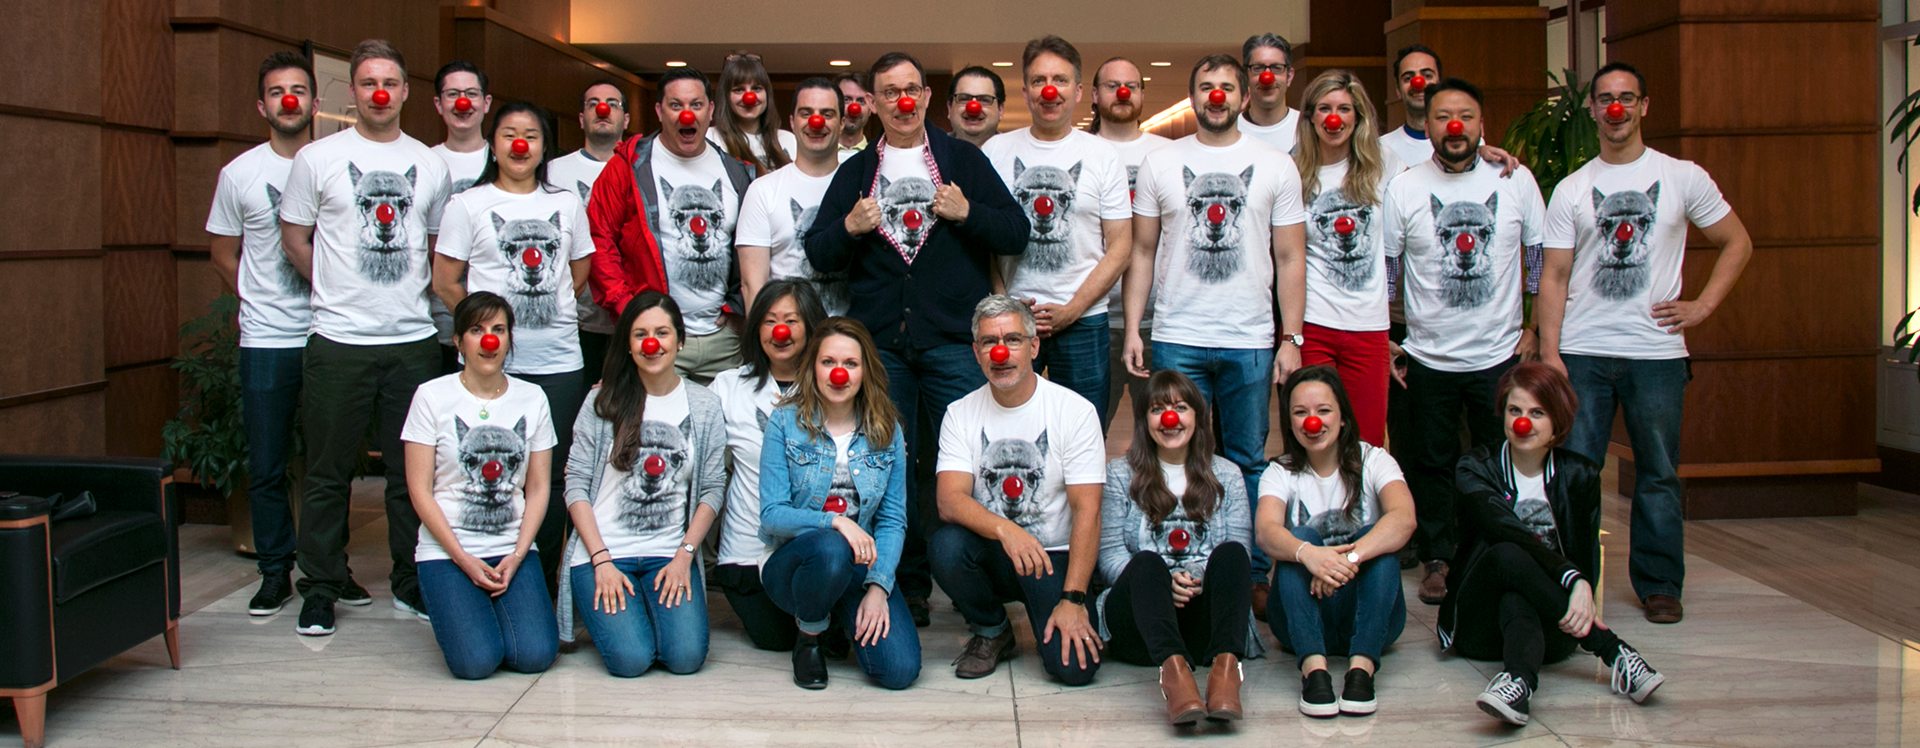 Grafik employees wearing a lama tshirt with a red nose, while they are wearing red noses